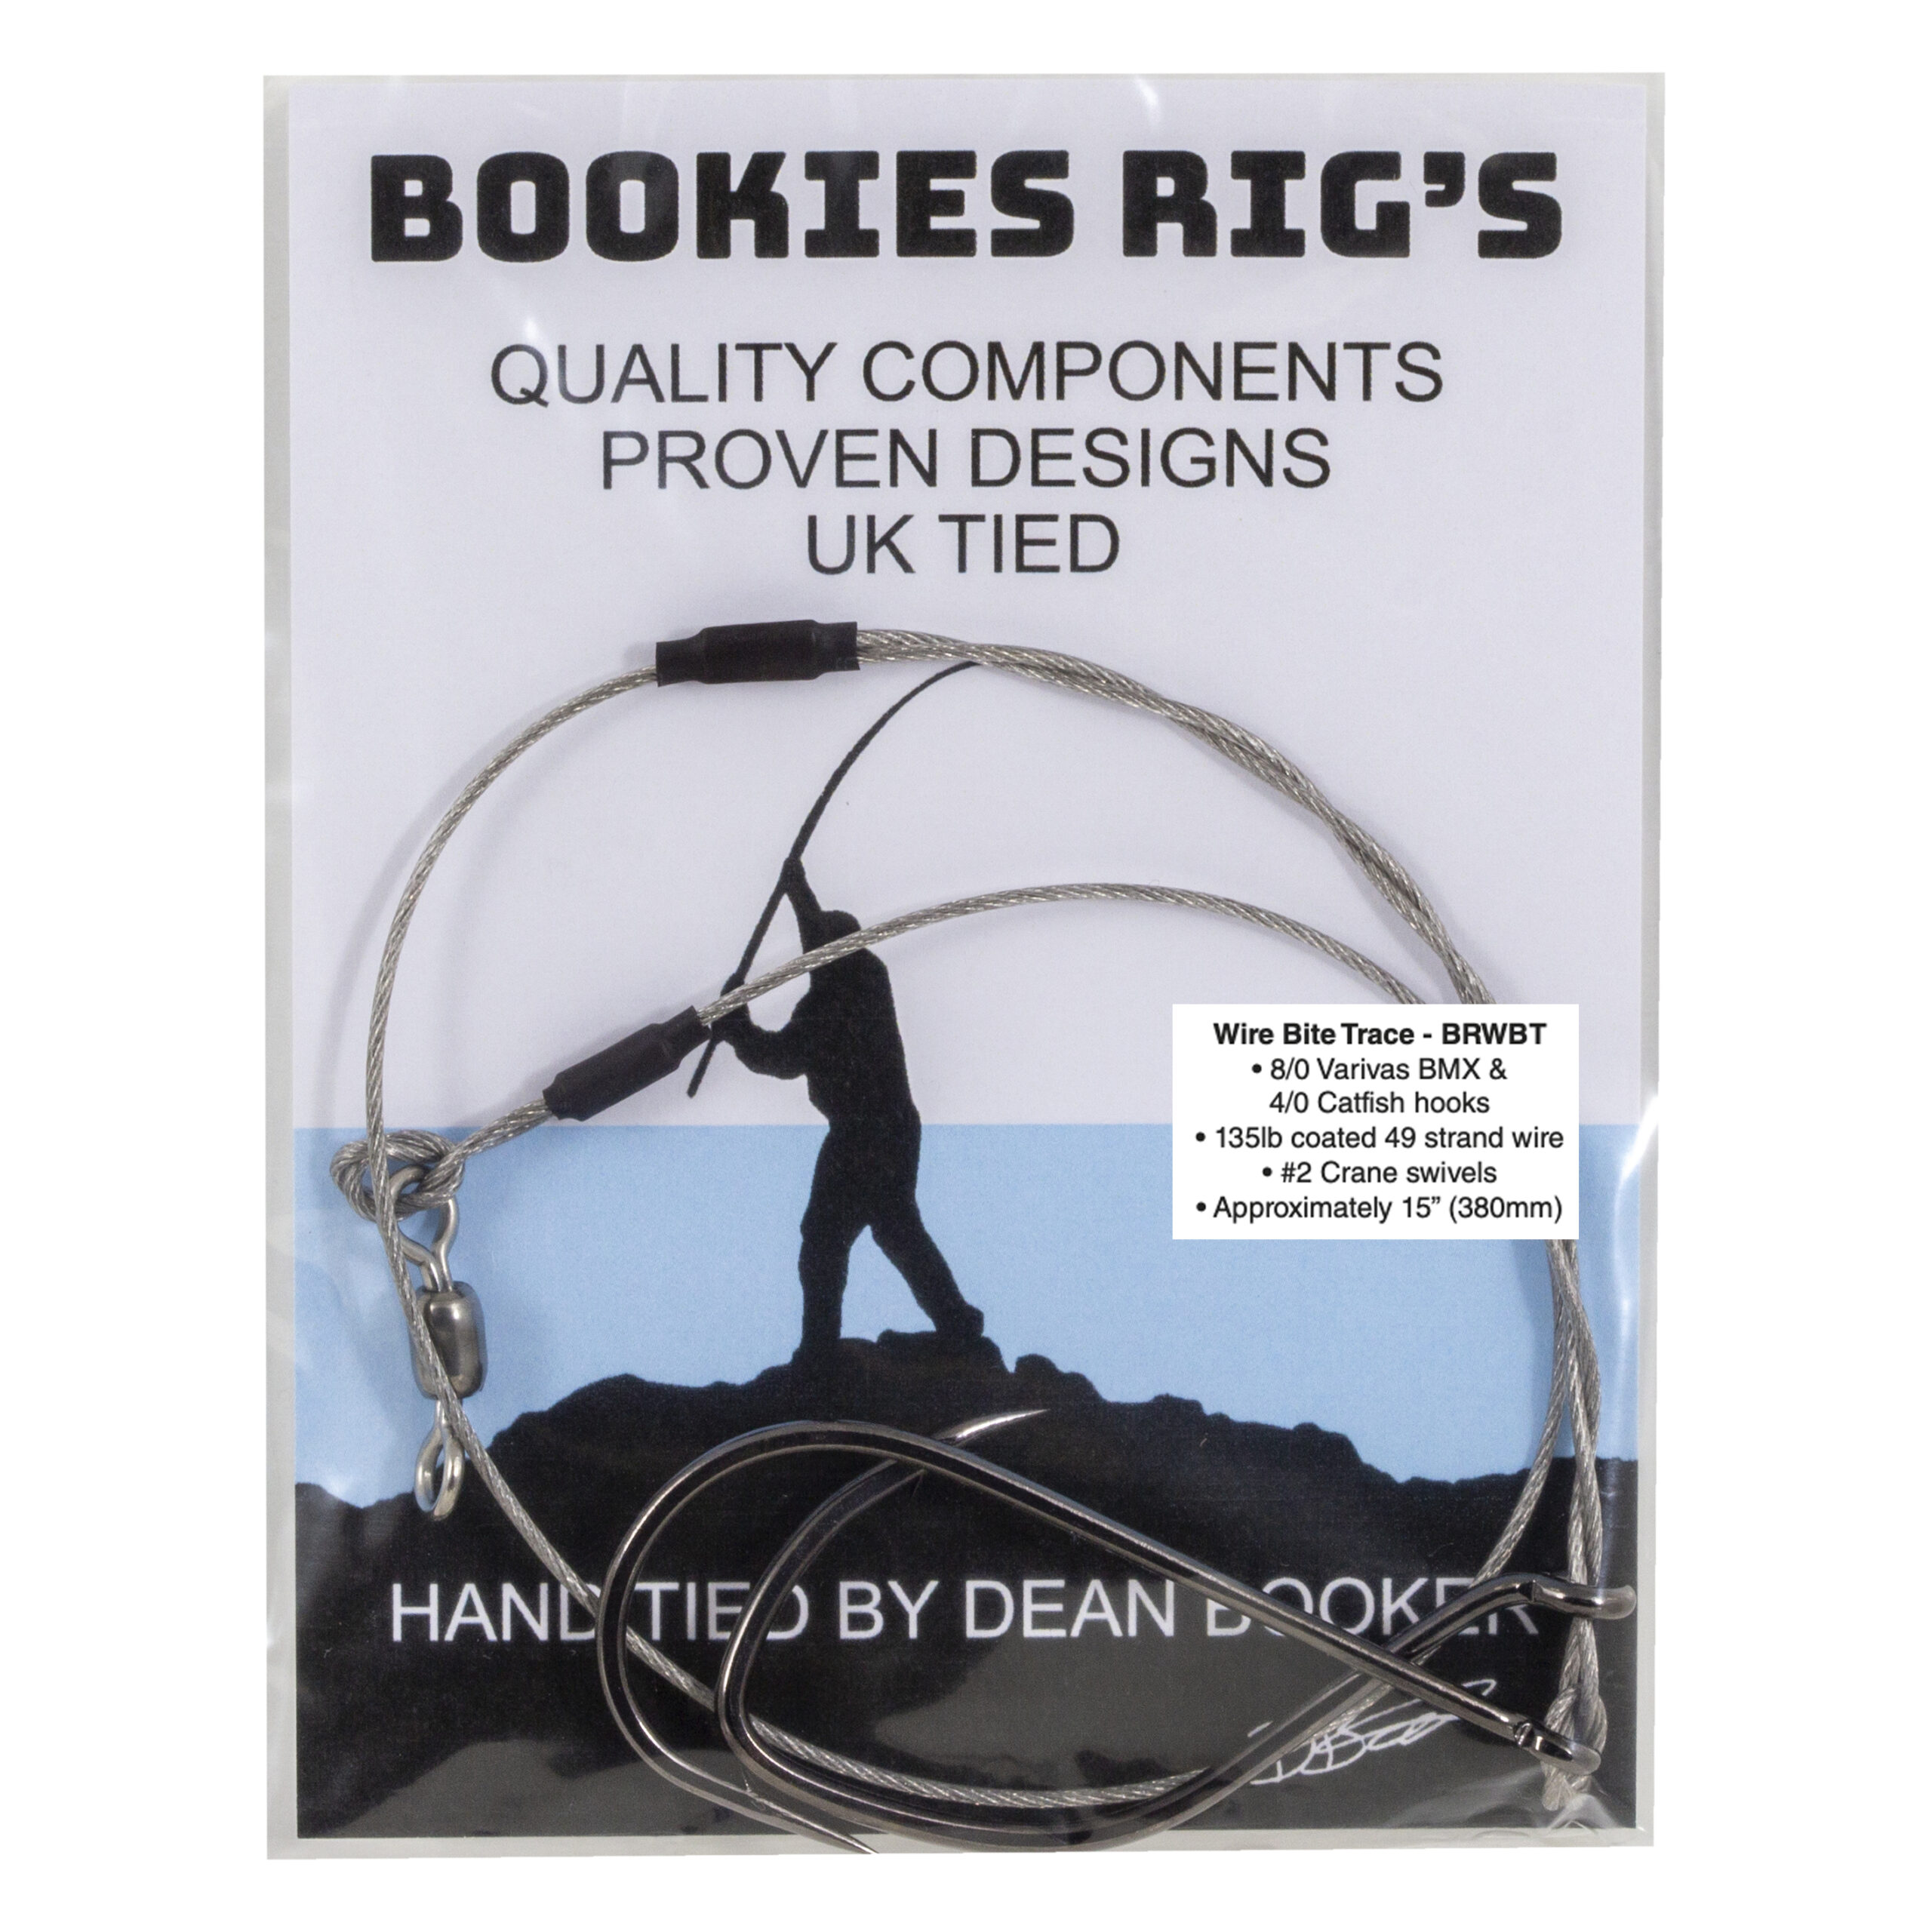 Bookies Rig's Wire Bite Trace - Veals Mail Order